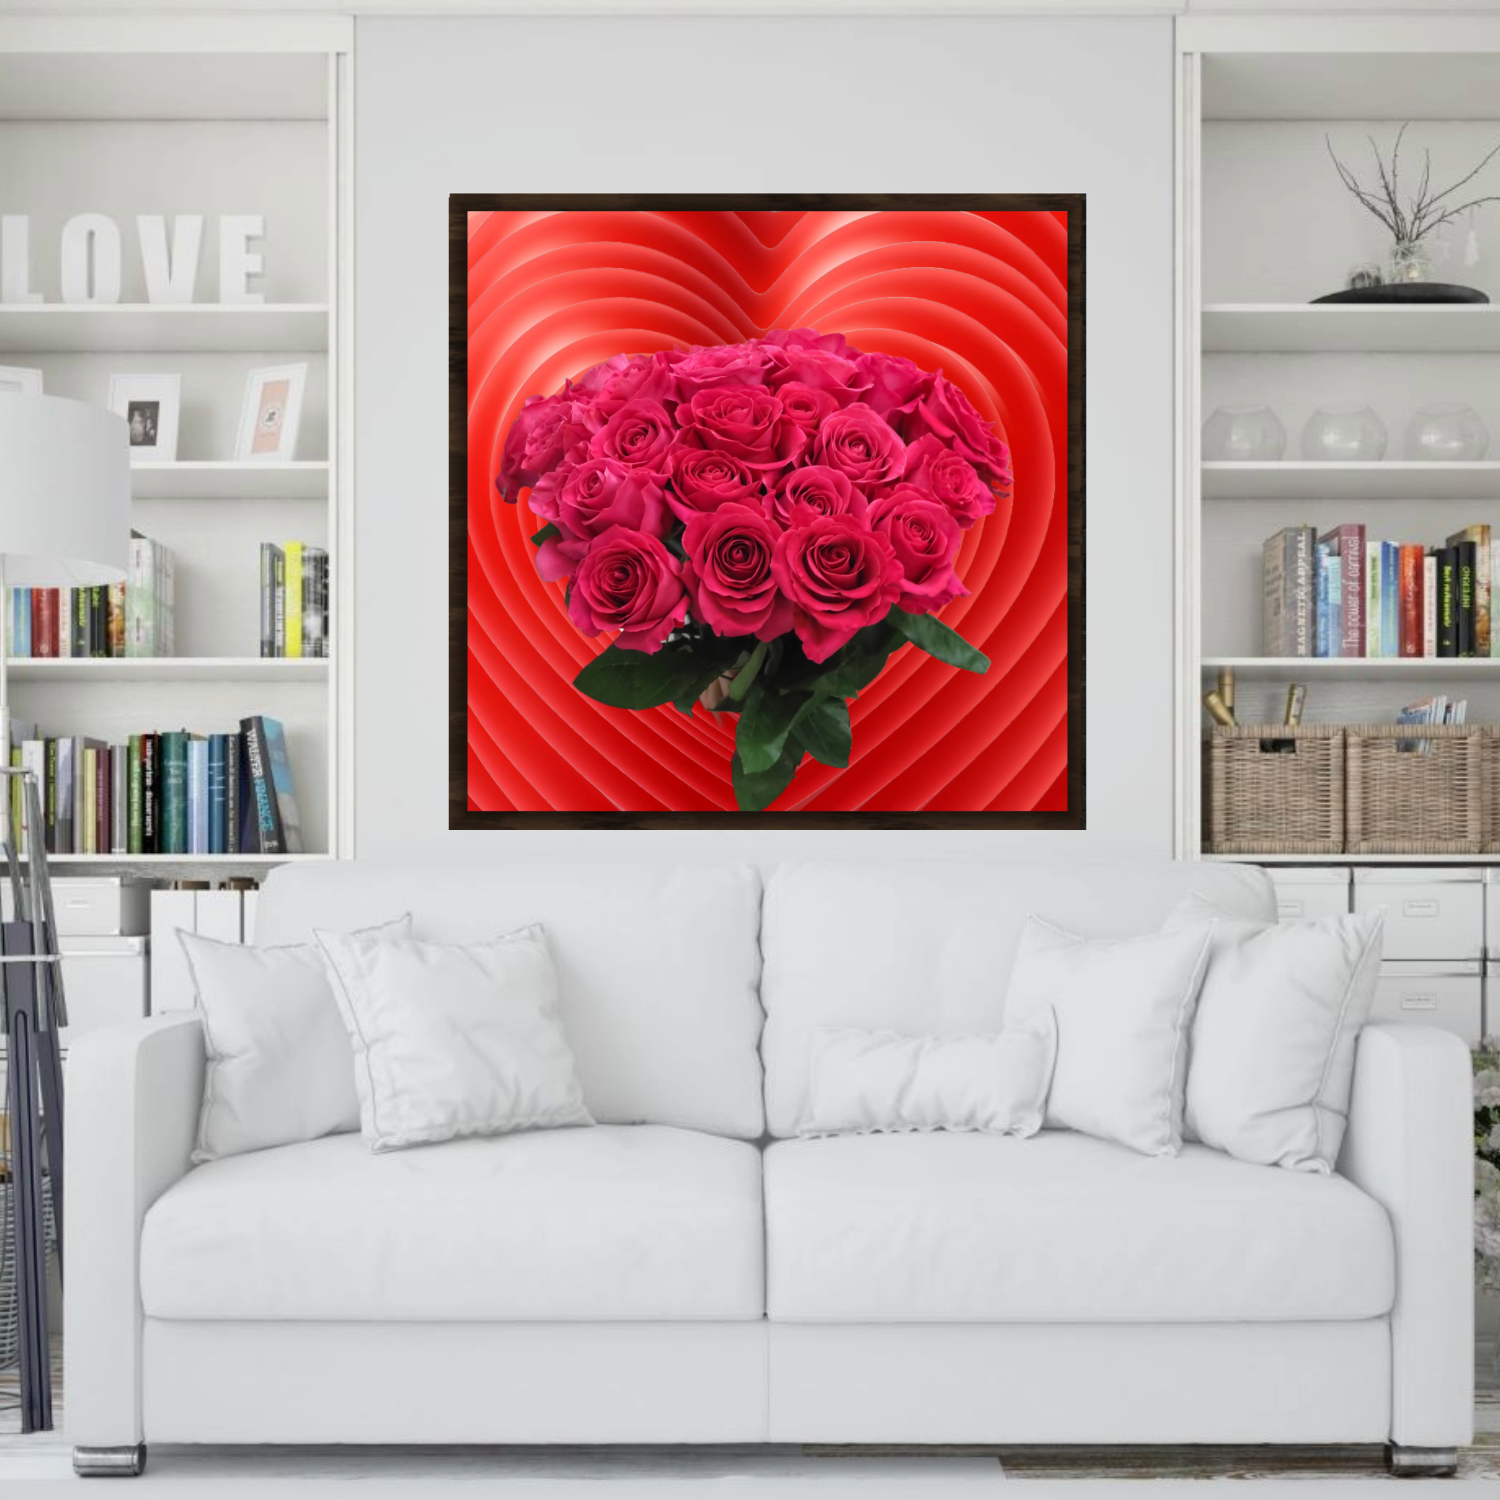 Wall Art LOVE ROSES Canvas Print Painting Original Giclee 32X32 + Frame Love Nice Beauty Fun Design Fit Hot House Home Office Gift Ready To Hang